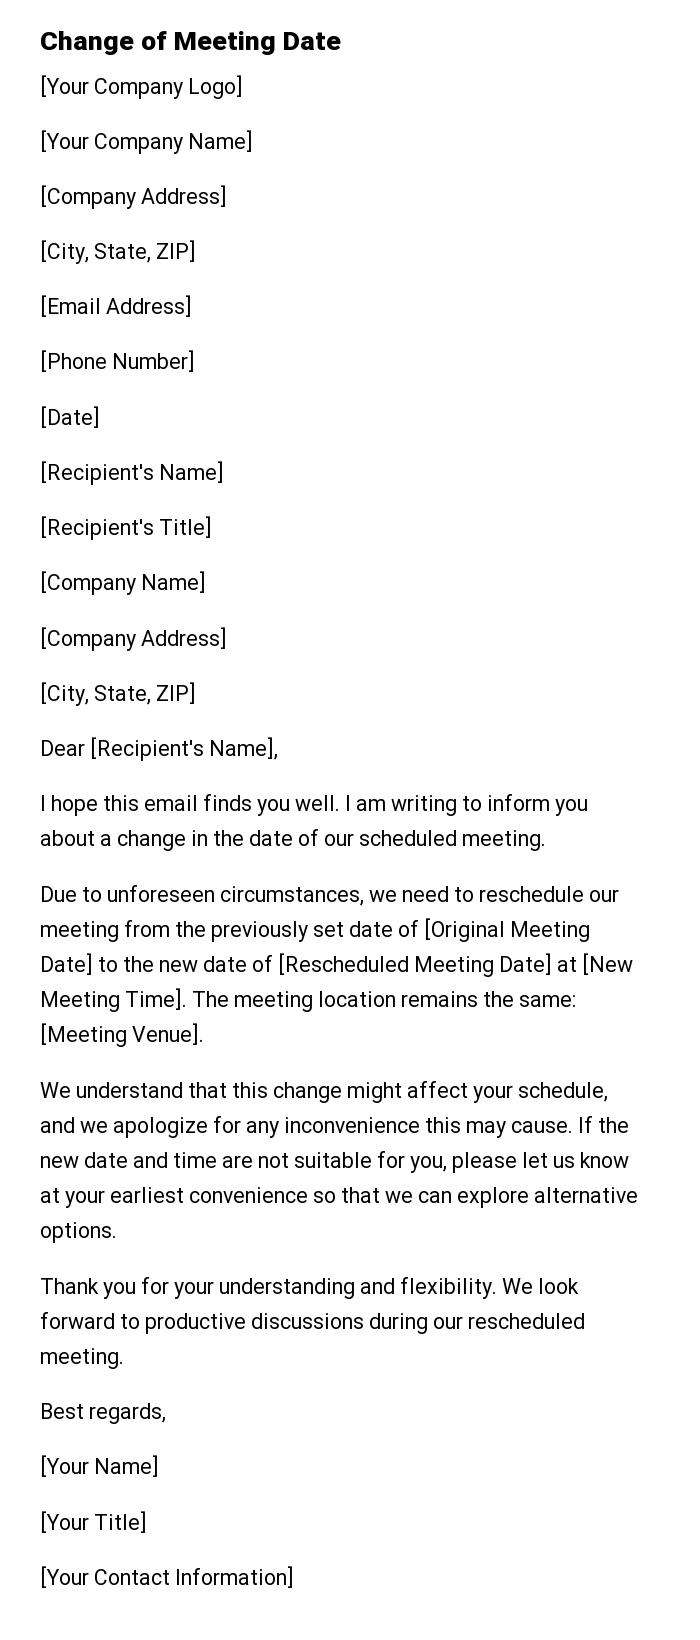 Change of Meeting Date